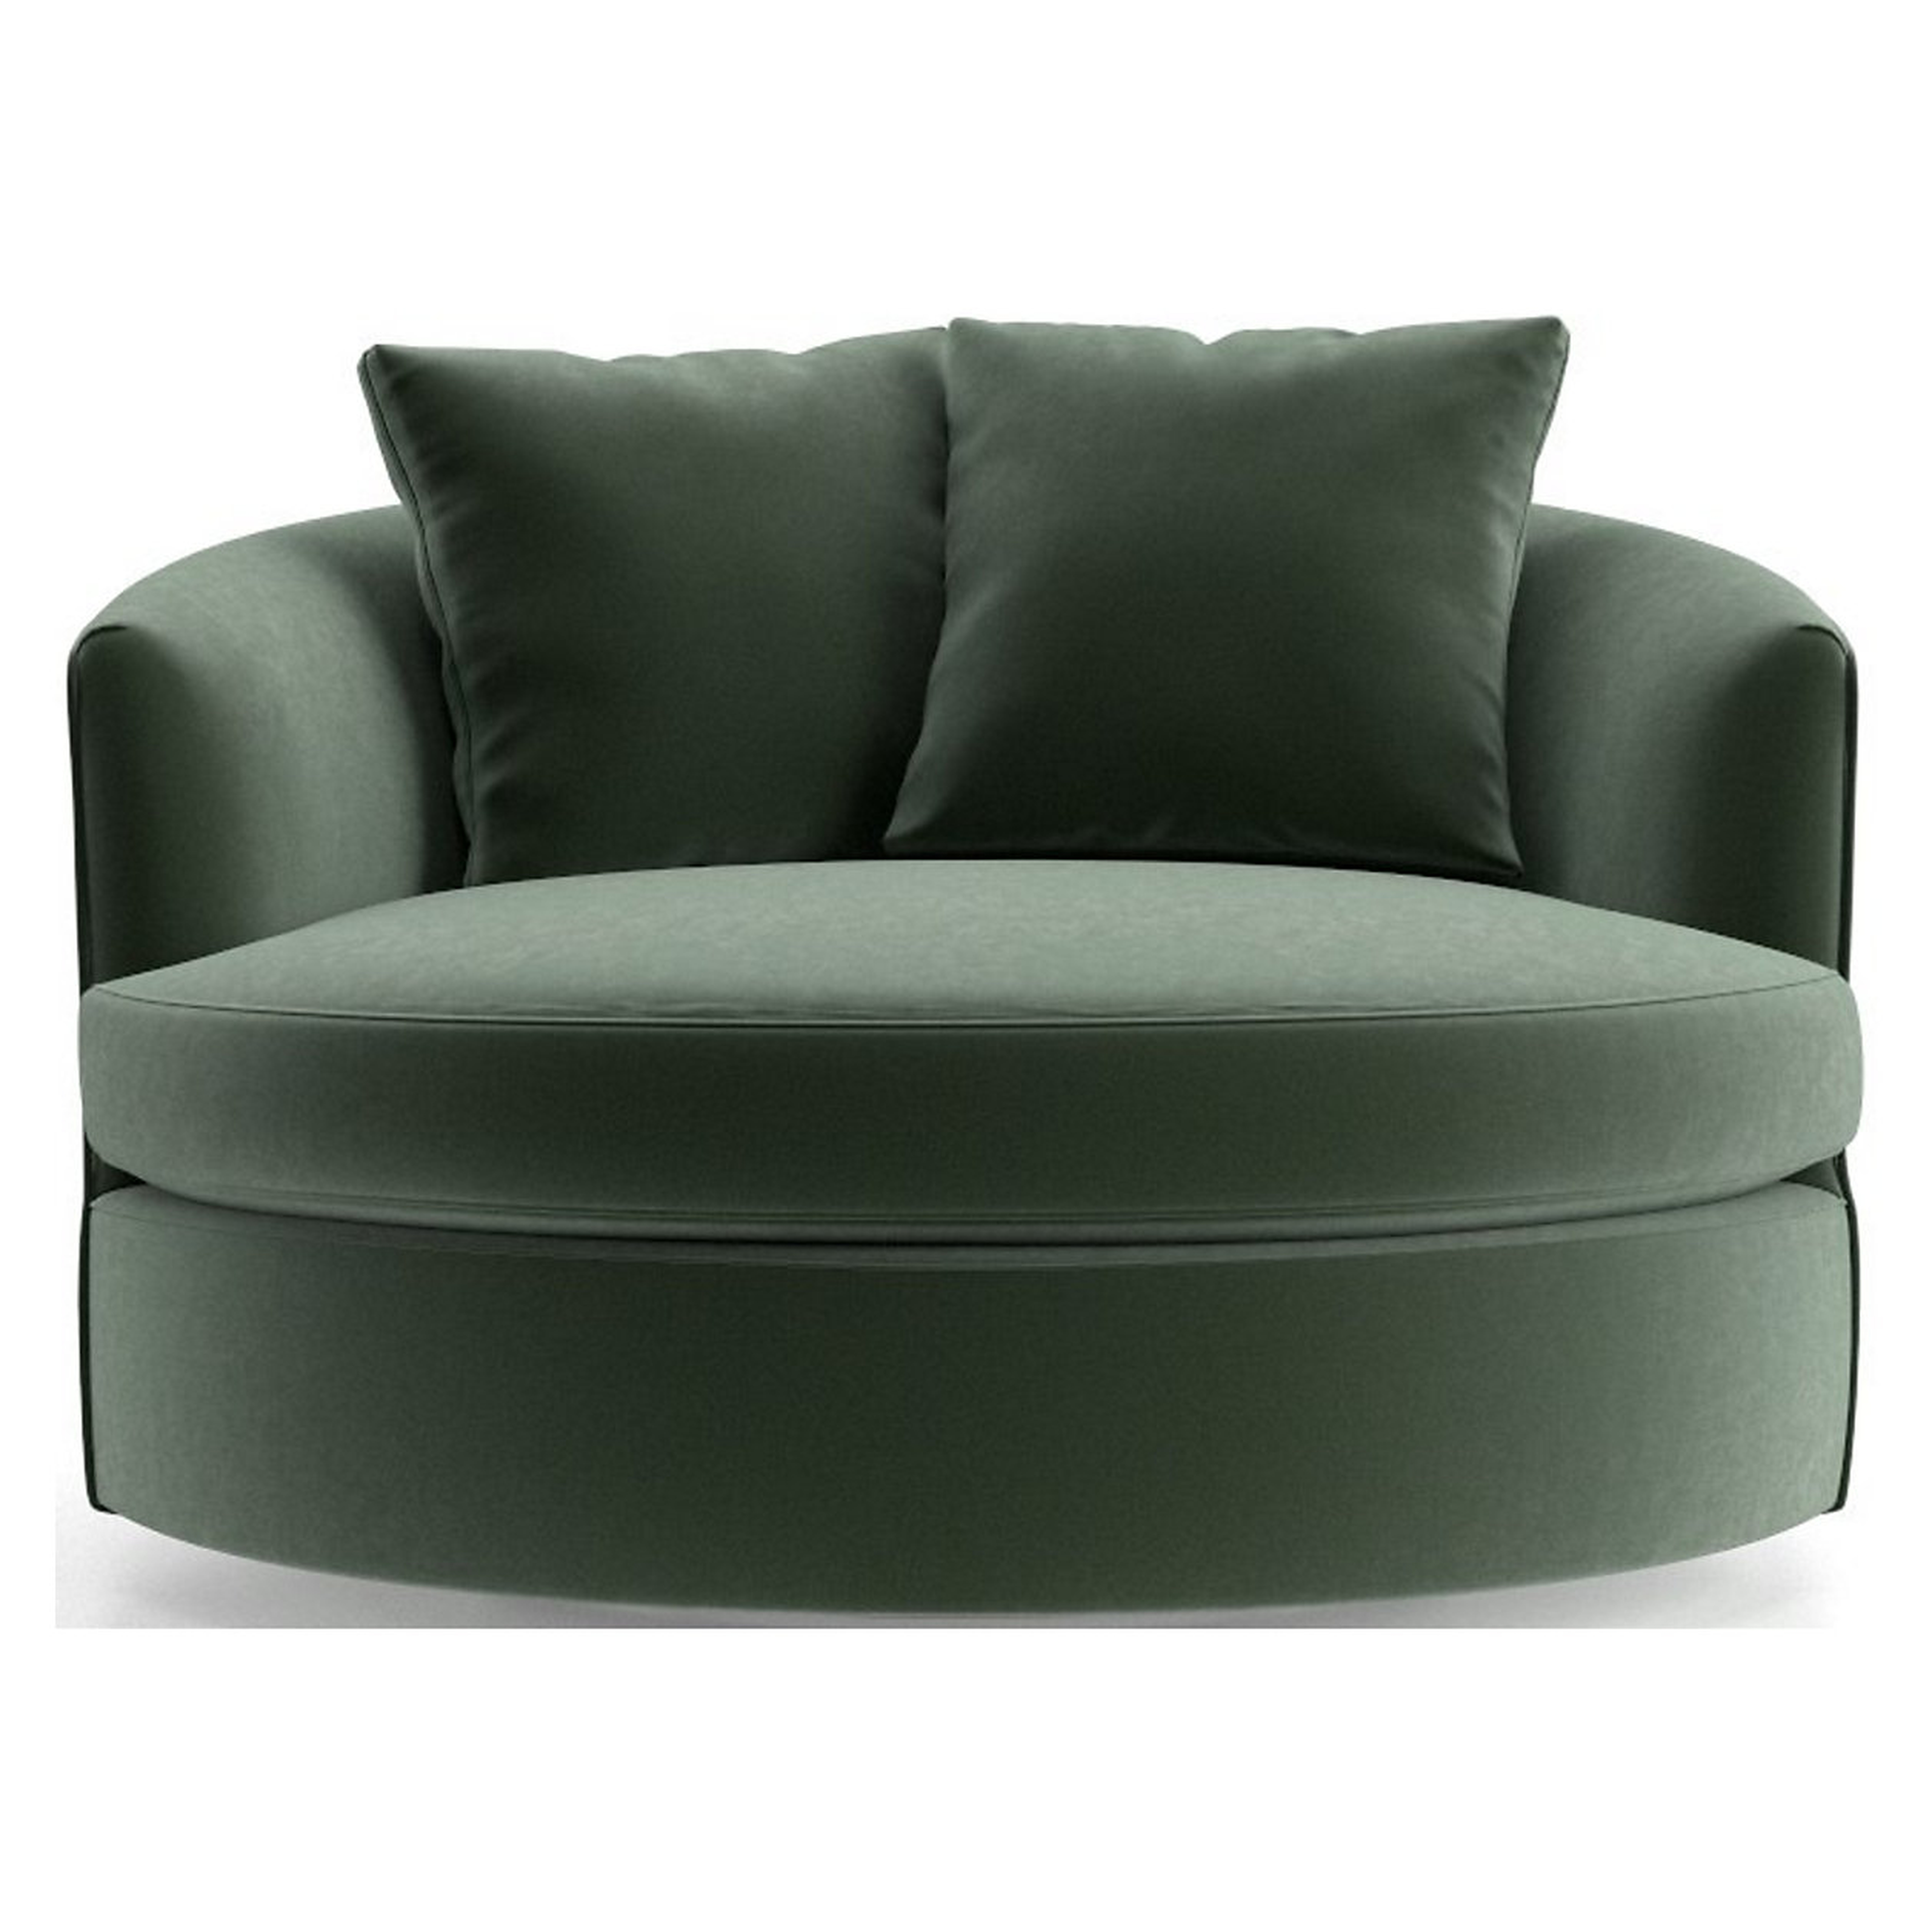 Tillie Grande Swivel Chair - Crate and Barrel